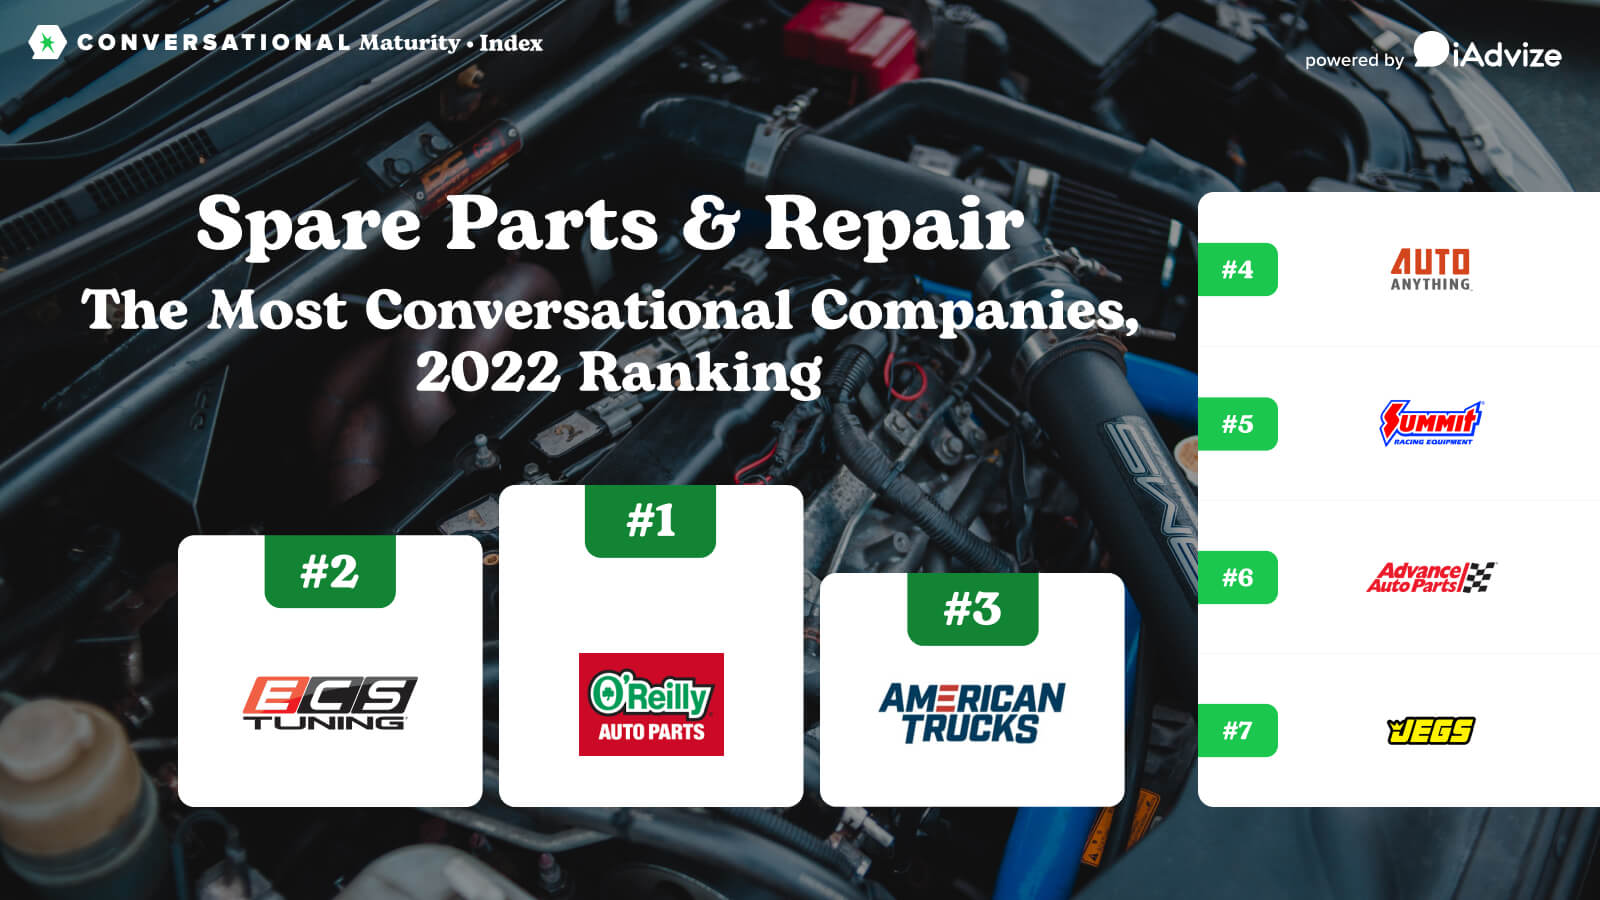  Featured image: Conversational maturity index for spare parts and repair companies - Read full post: Conversational Maturity Index: Spare Parts and Repair Companies 2022 Ranking